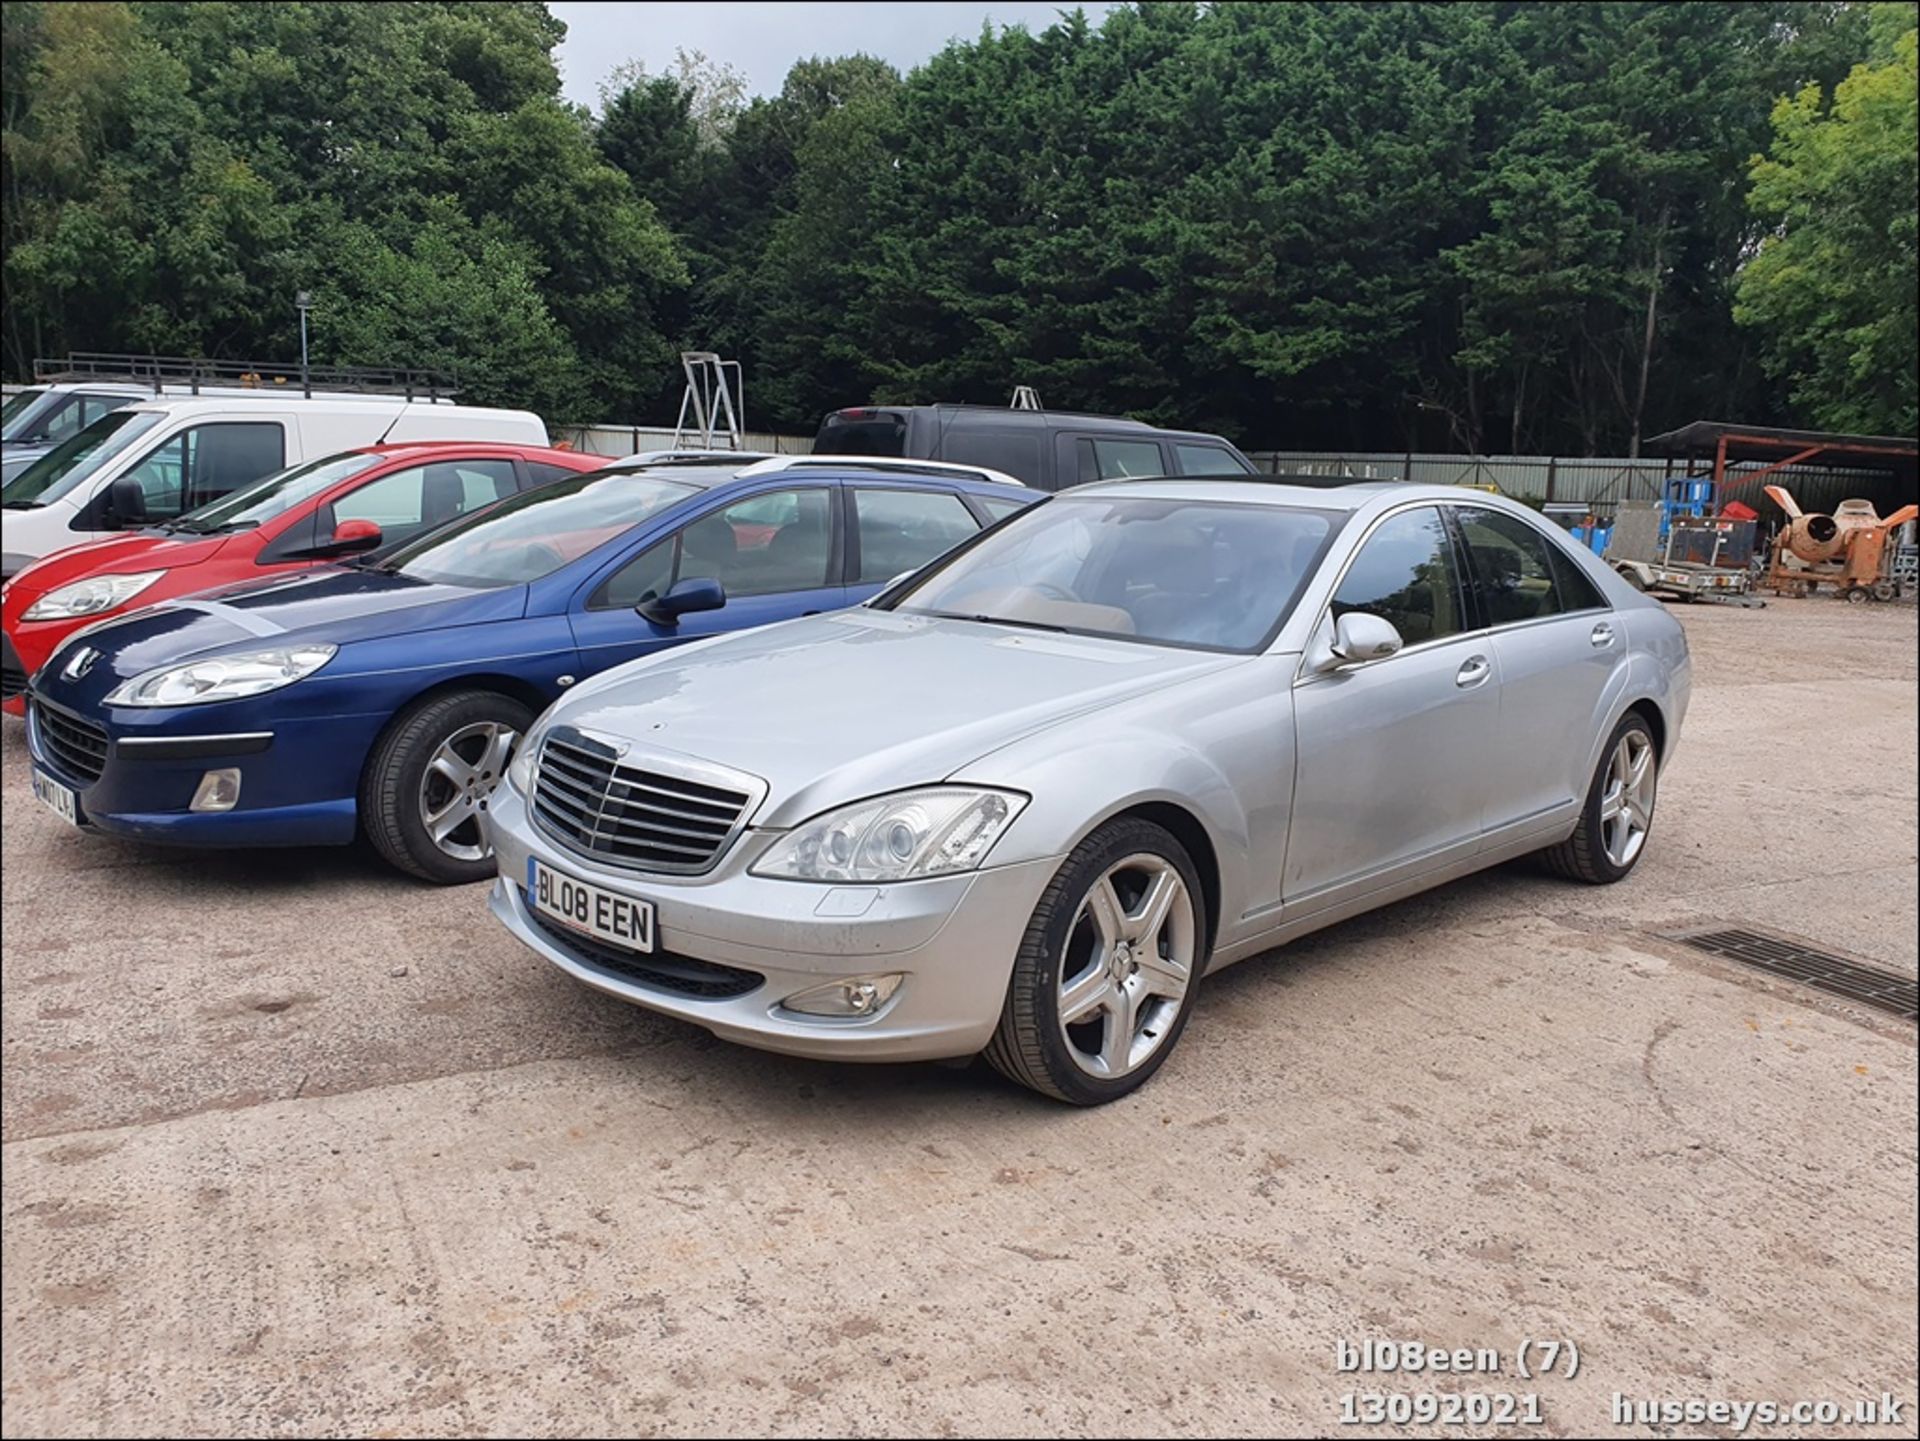 08/08 MERCEDES S320 CDI AUTO - 2987cc 4dr Saloon (Silver, 205k) - Image 7 of 16